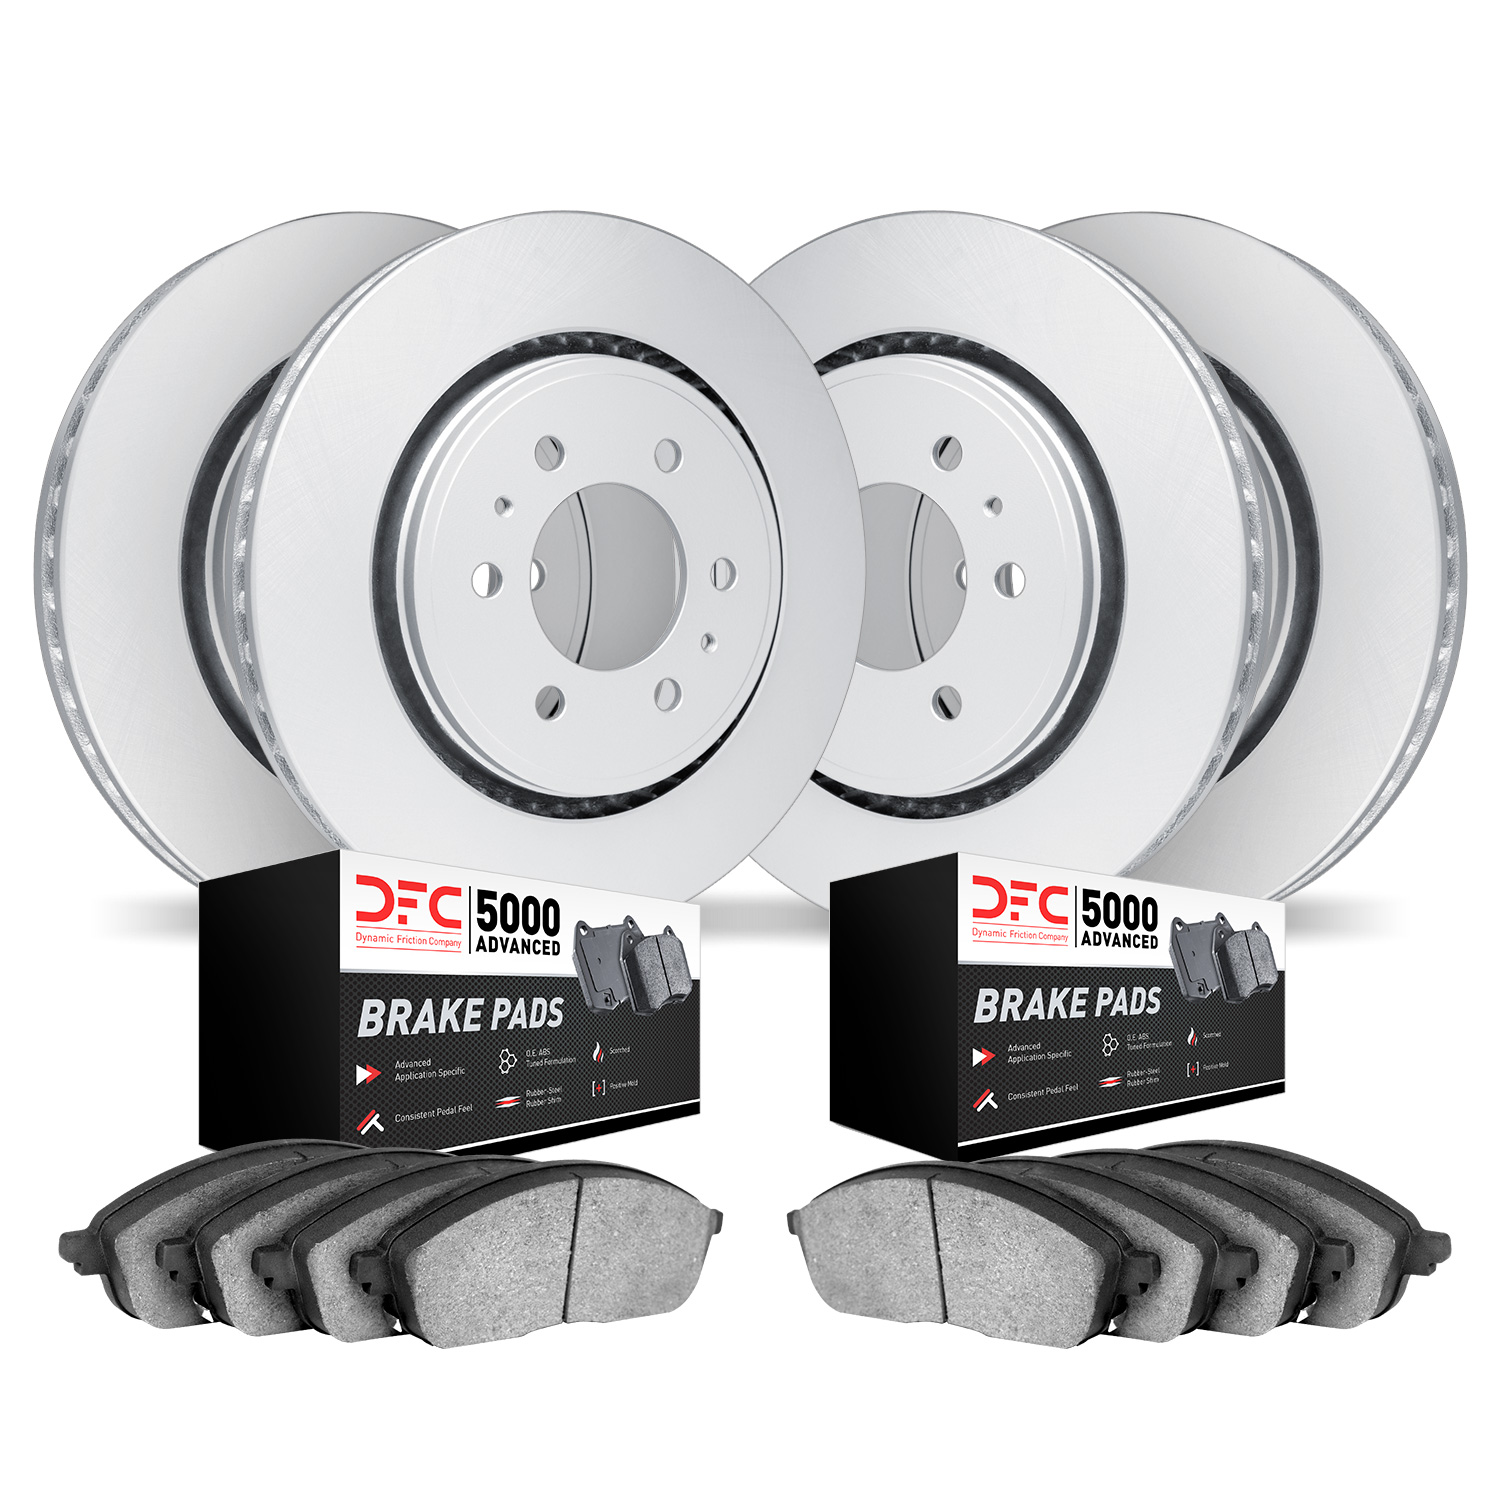 4504-54040 Geospec Brake Rotors w/5000 Advanced Brake Pads Kit, 2009-2009 Ford/Lincoln/Mercury/Mazda, Position: Front and Rear